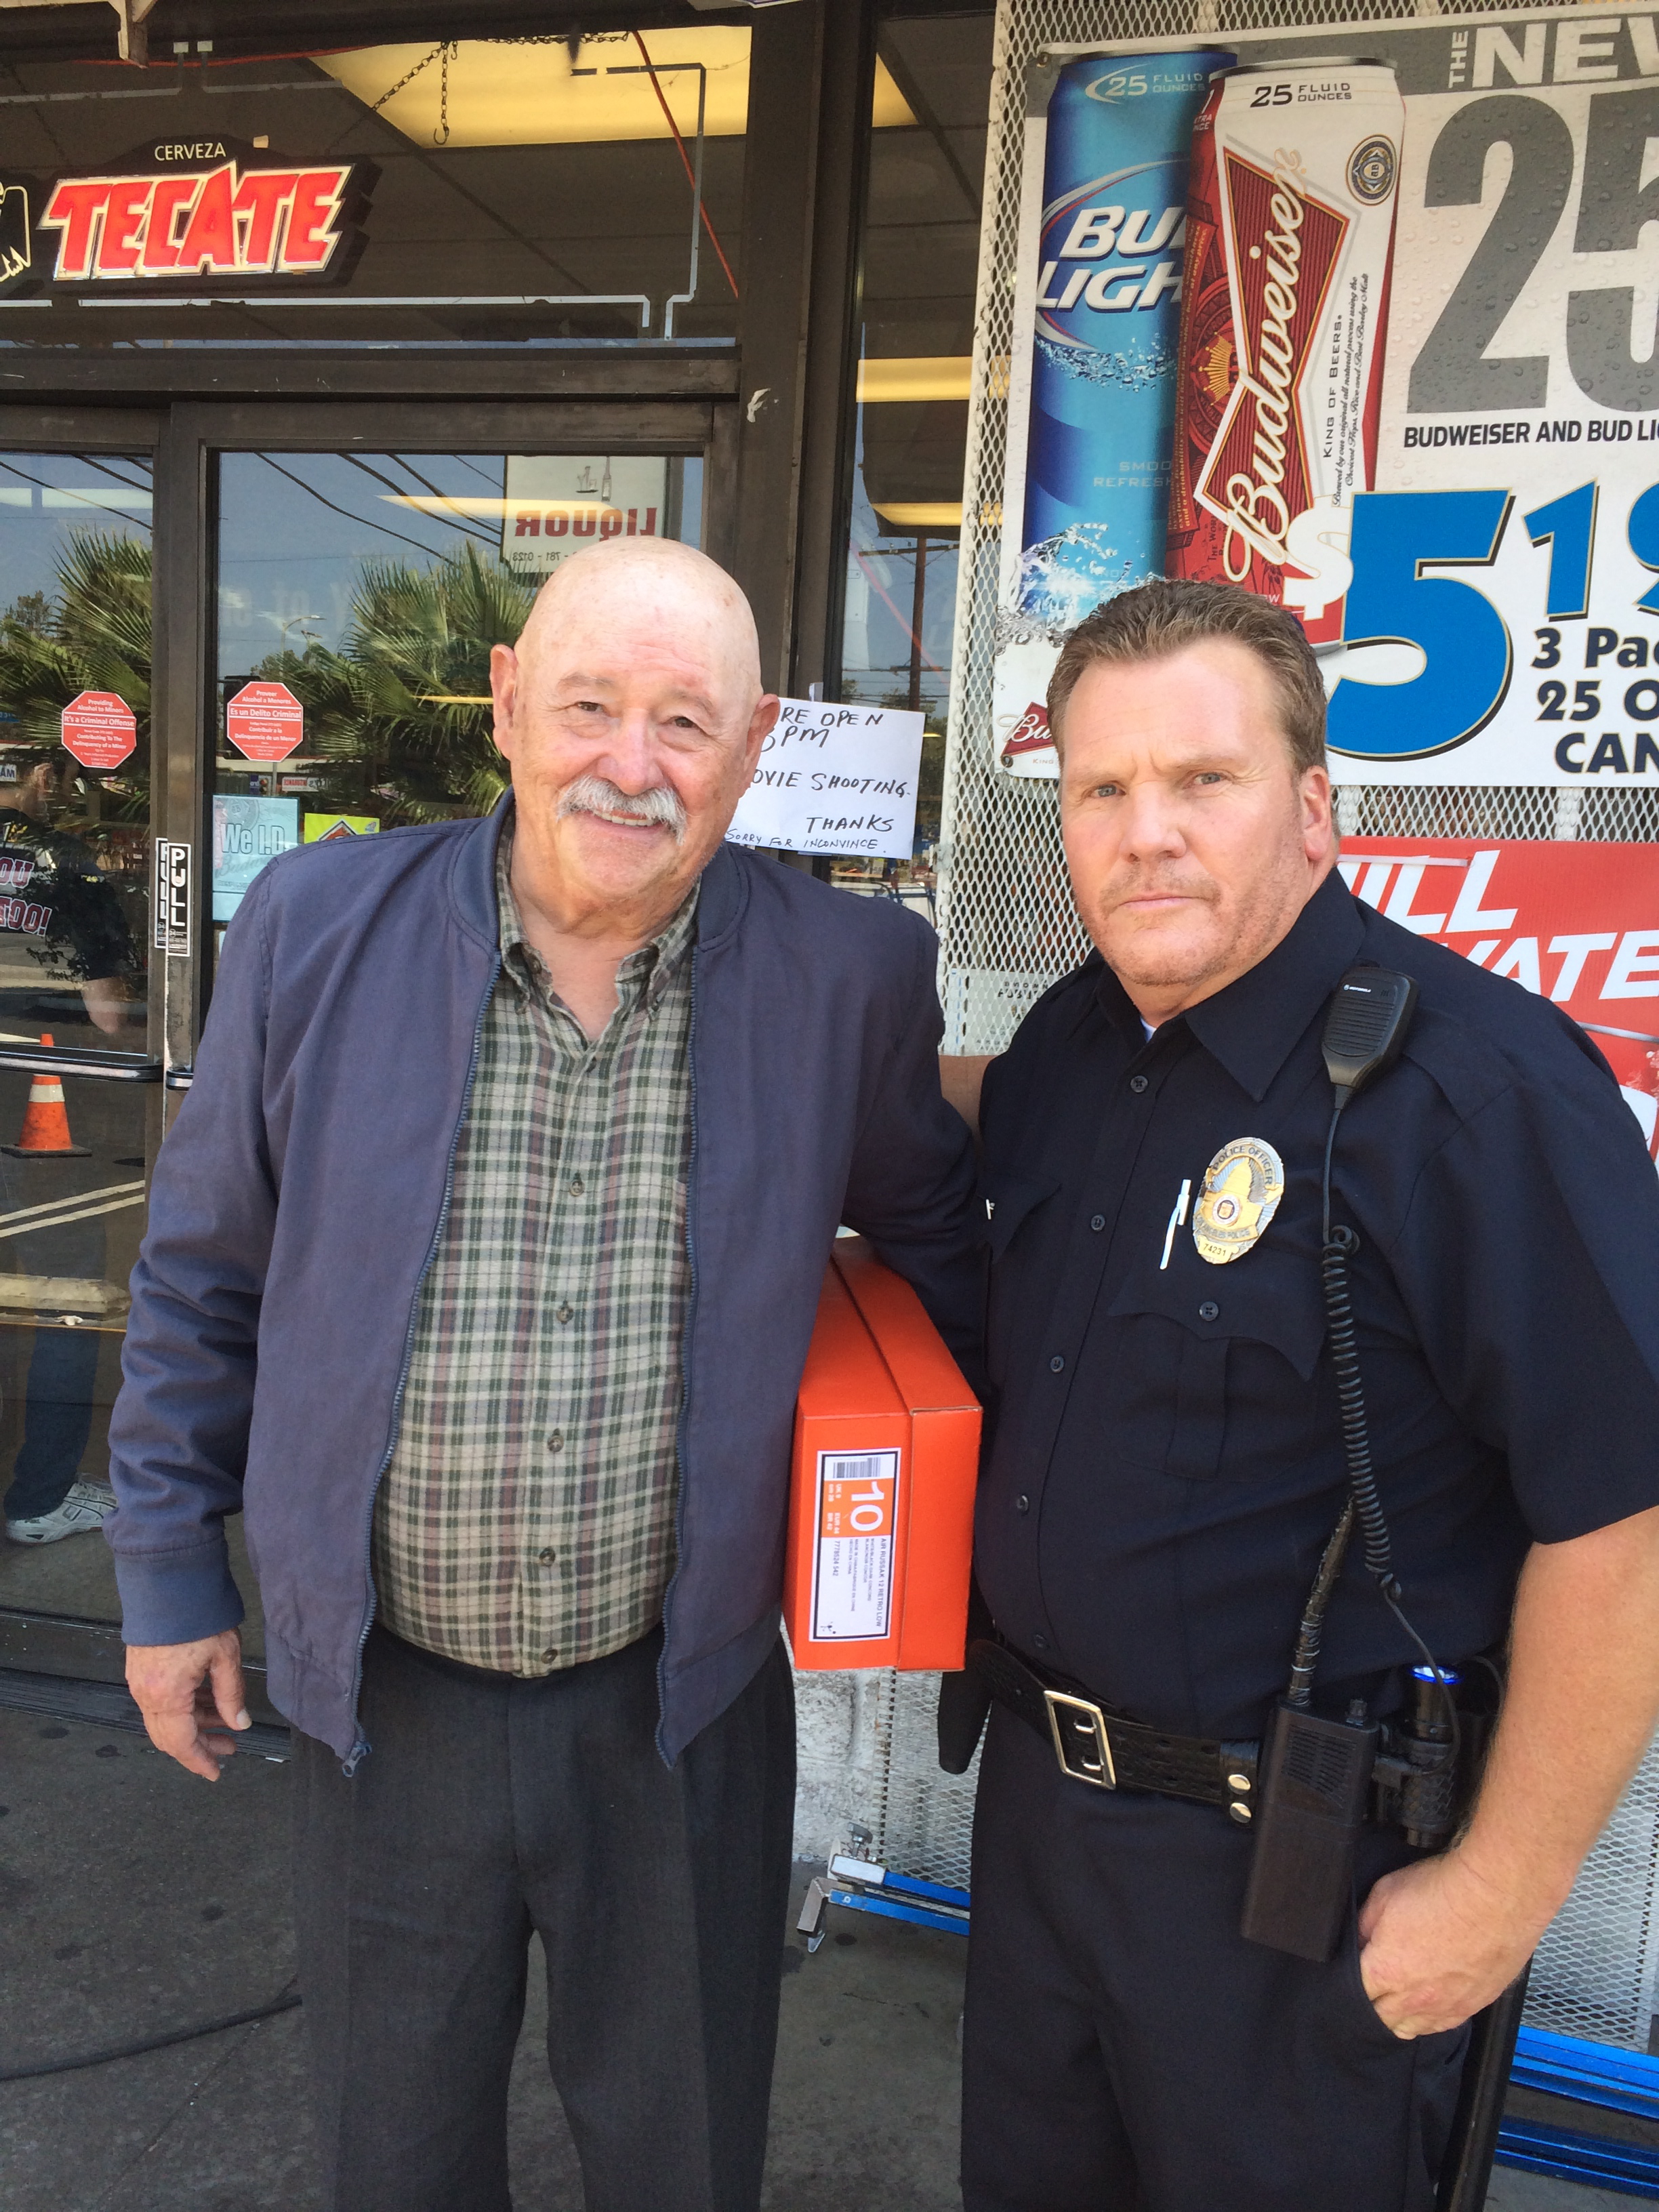 Barry Corbin & Noah Staggs During the Filming of a Short Film